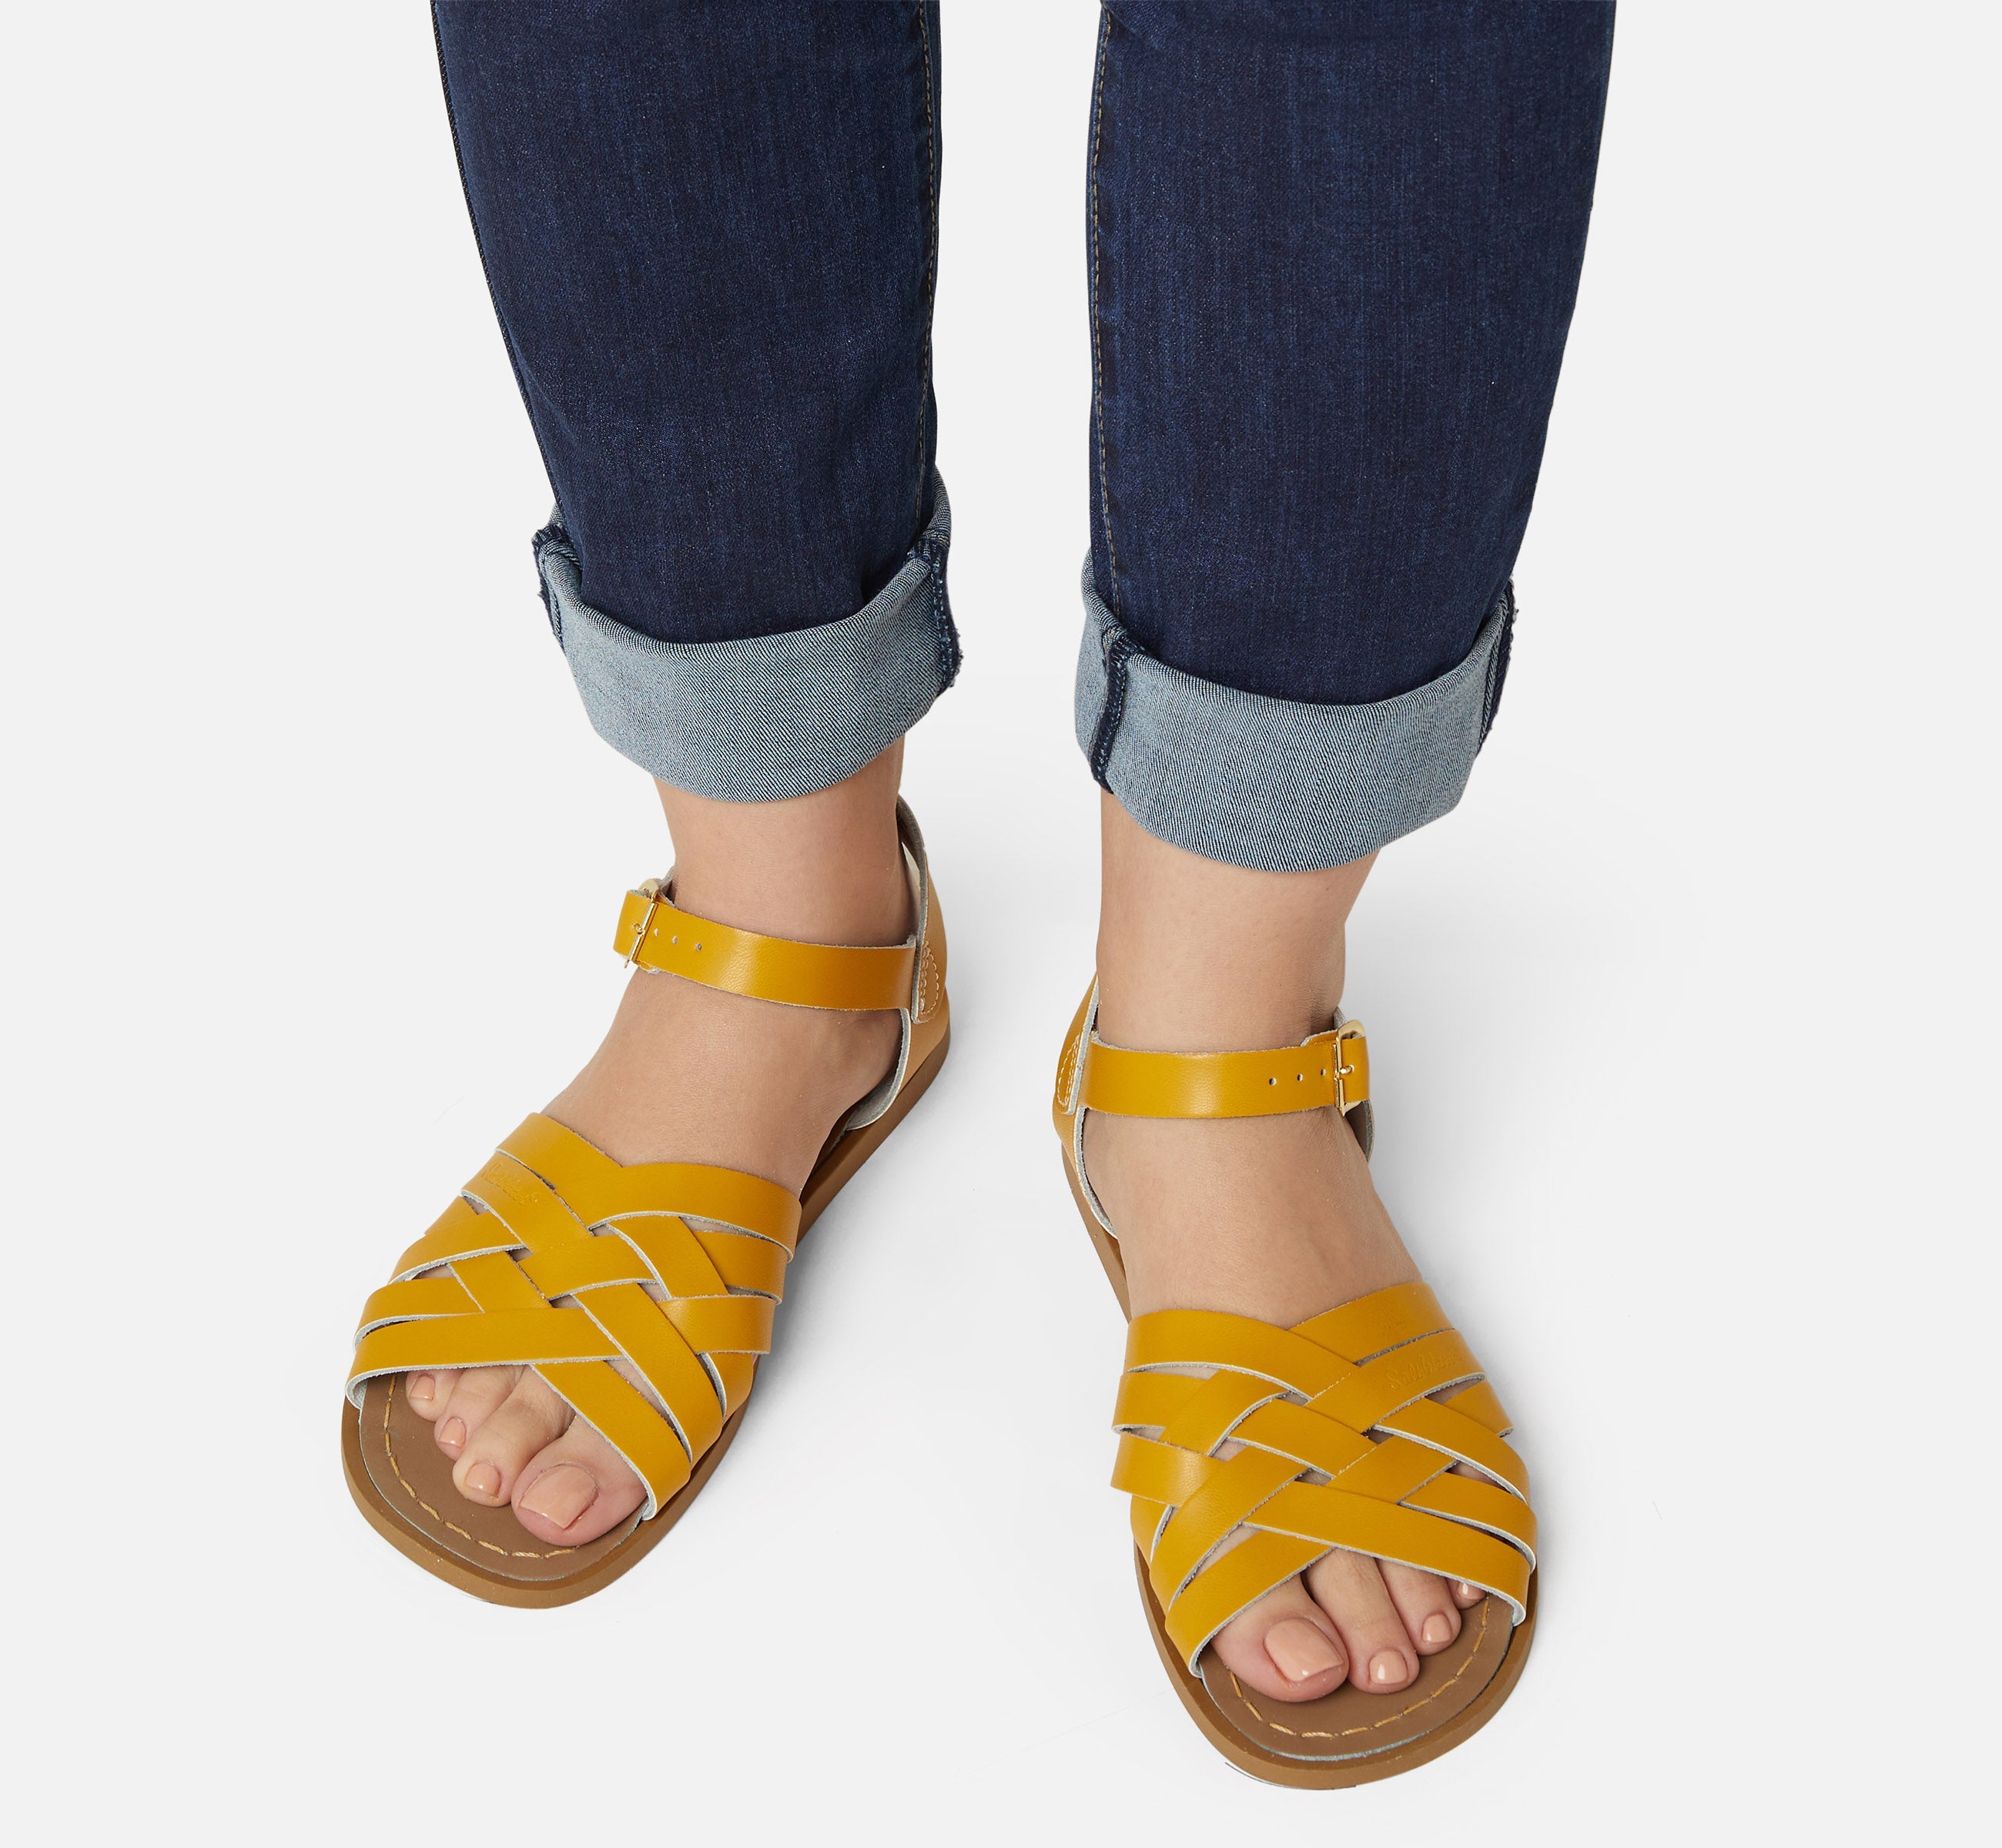 Narrower Fit Sandals